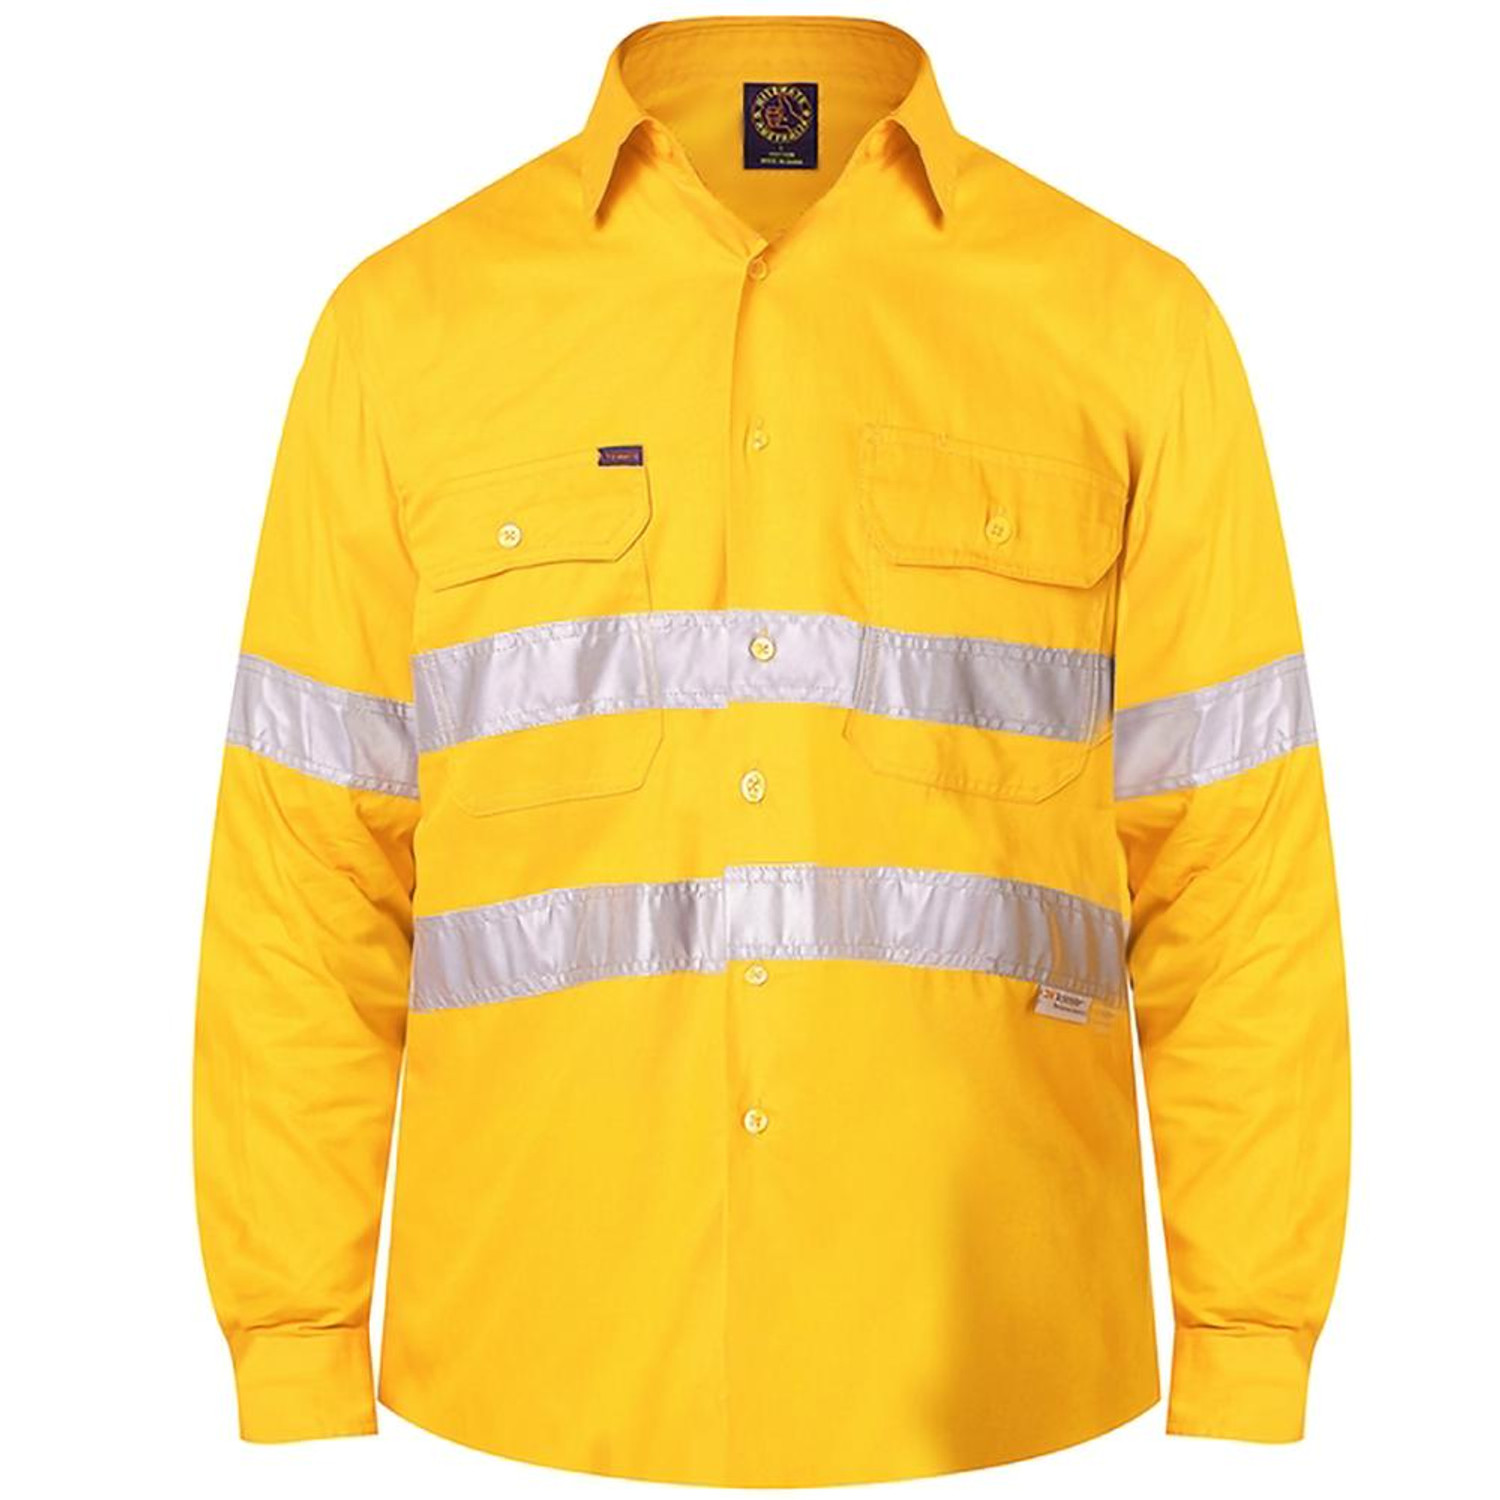 Ritemate RM1040R Mens Open Front Long Sleeve Shirt with Reflective Tape in Yellow/Navy Bulk Buy Deal, Buy 4 or more RM1040R or RM104CFR Shirts for dollar54.95 Each